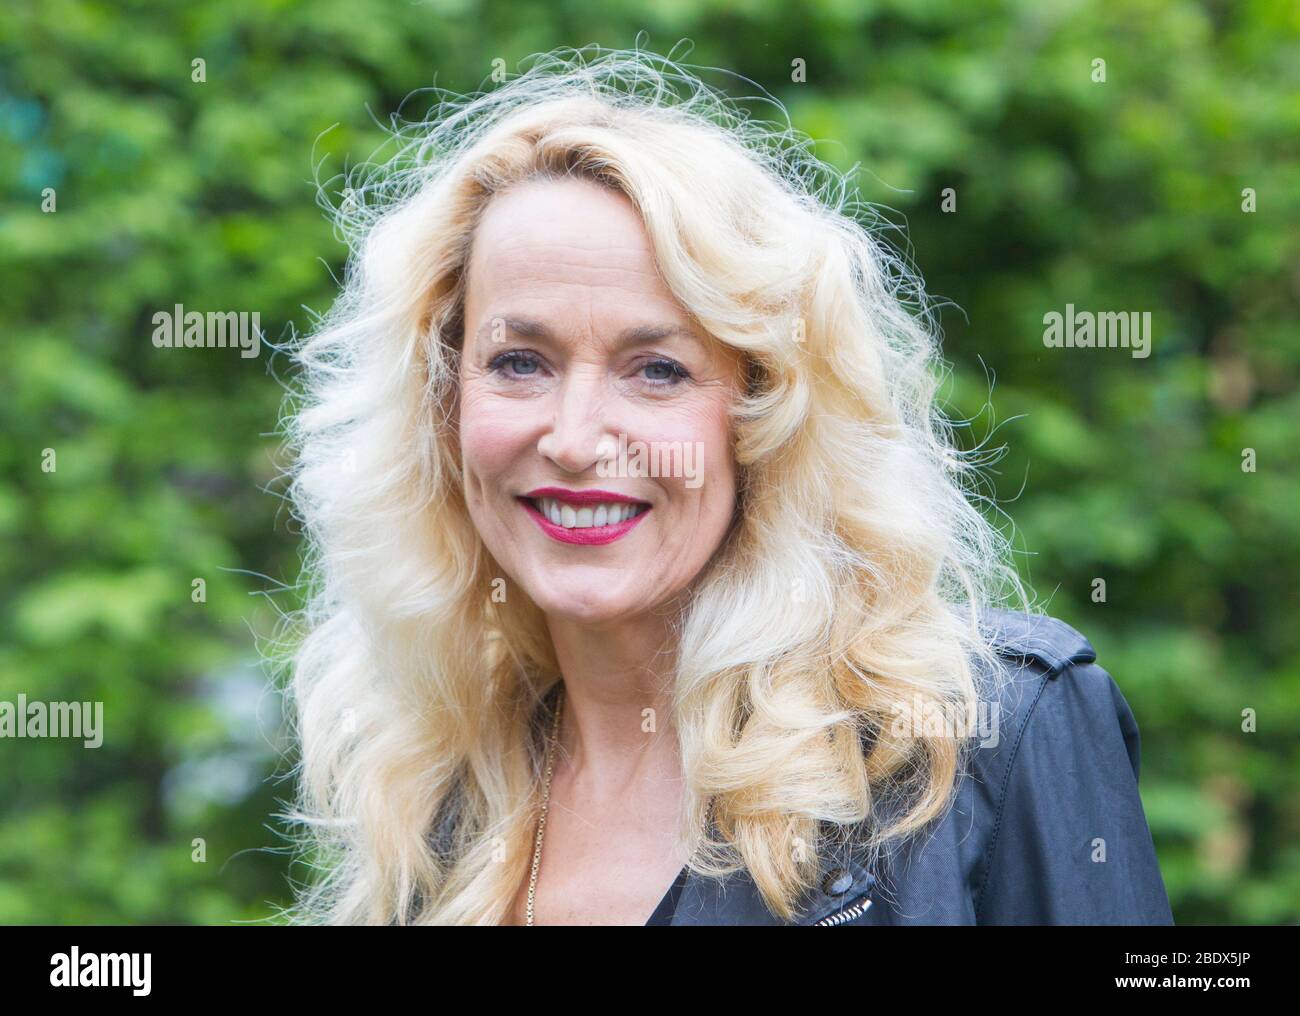 Jerry Hall, model and actress, at the Chelsea Flower Show. She married Mick Jagger in 1977. They split in 1990. She married Rupert Murdoch in 2015. Stock Photo